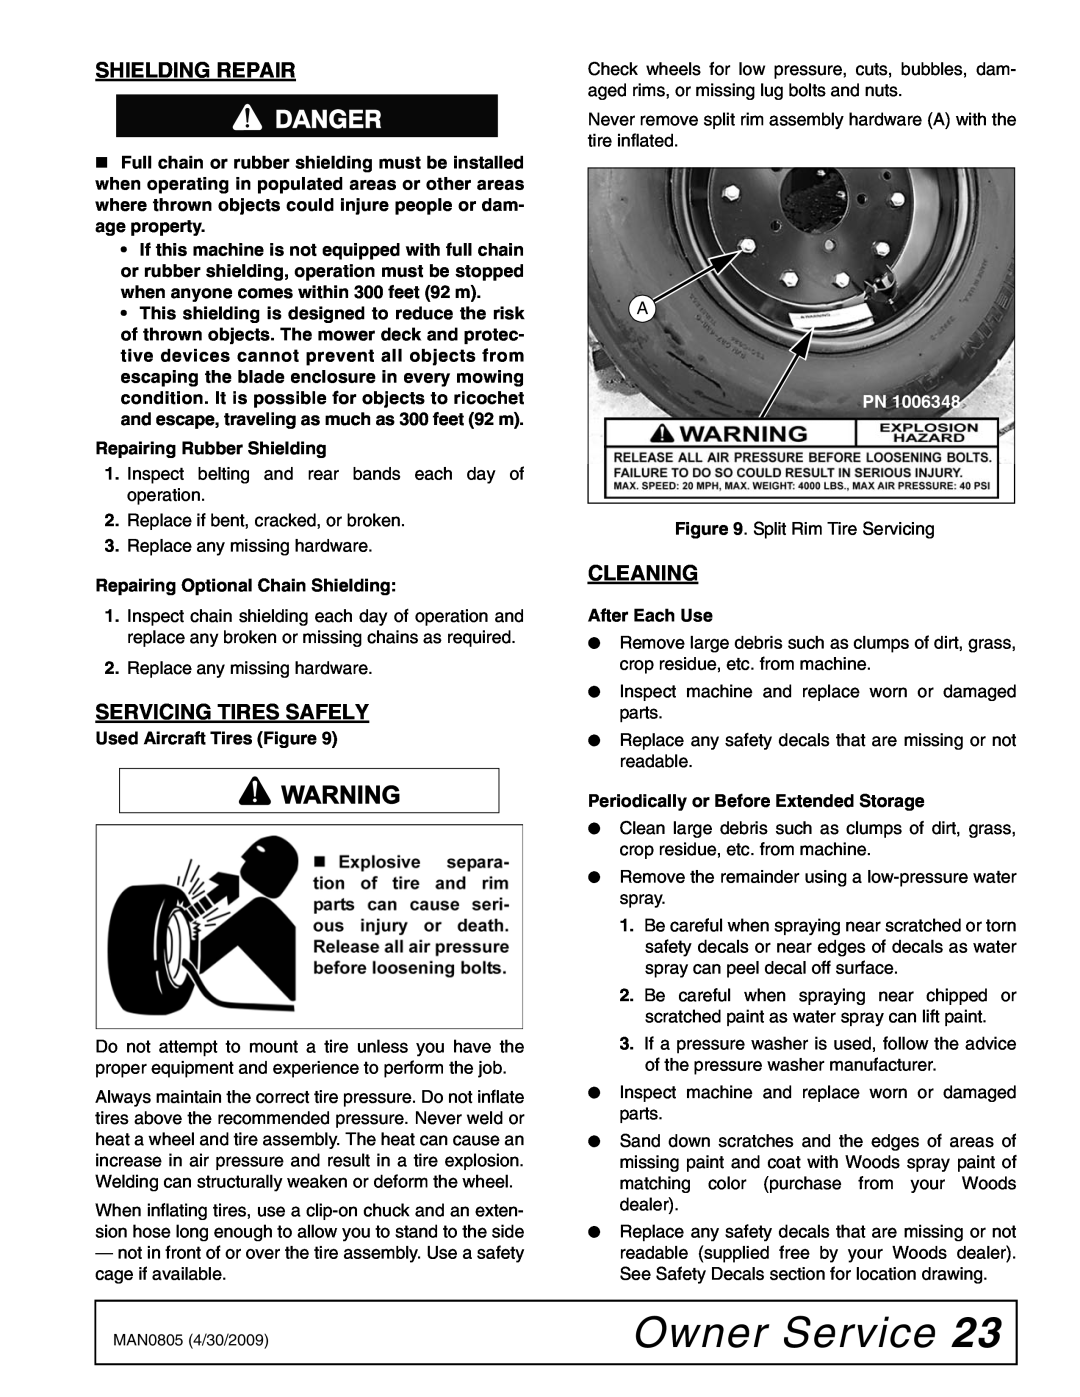 Woods Equipment BW126HBQ, BW180HBQ manual Owner Service, Shielding Repair, Servicing Tires Safely, Cleaning 